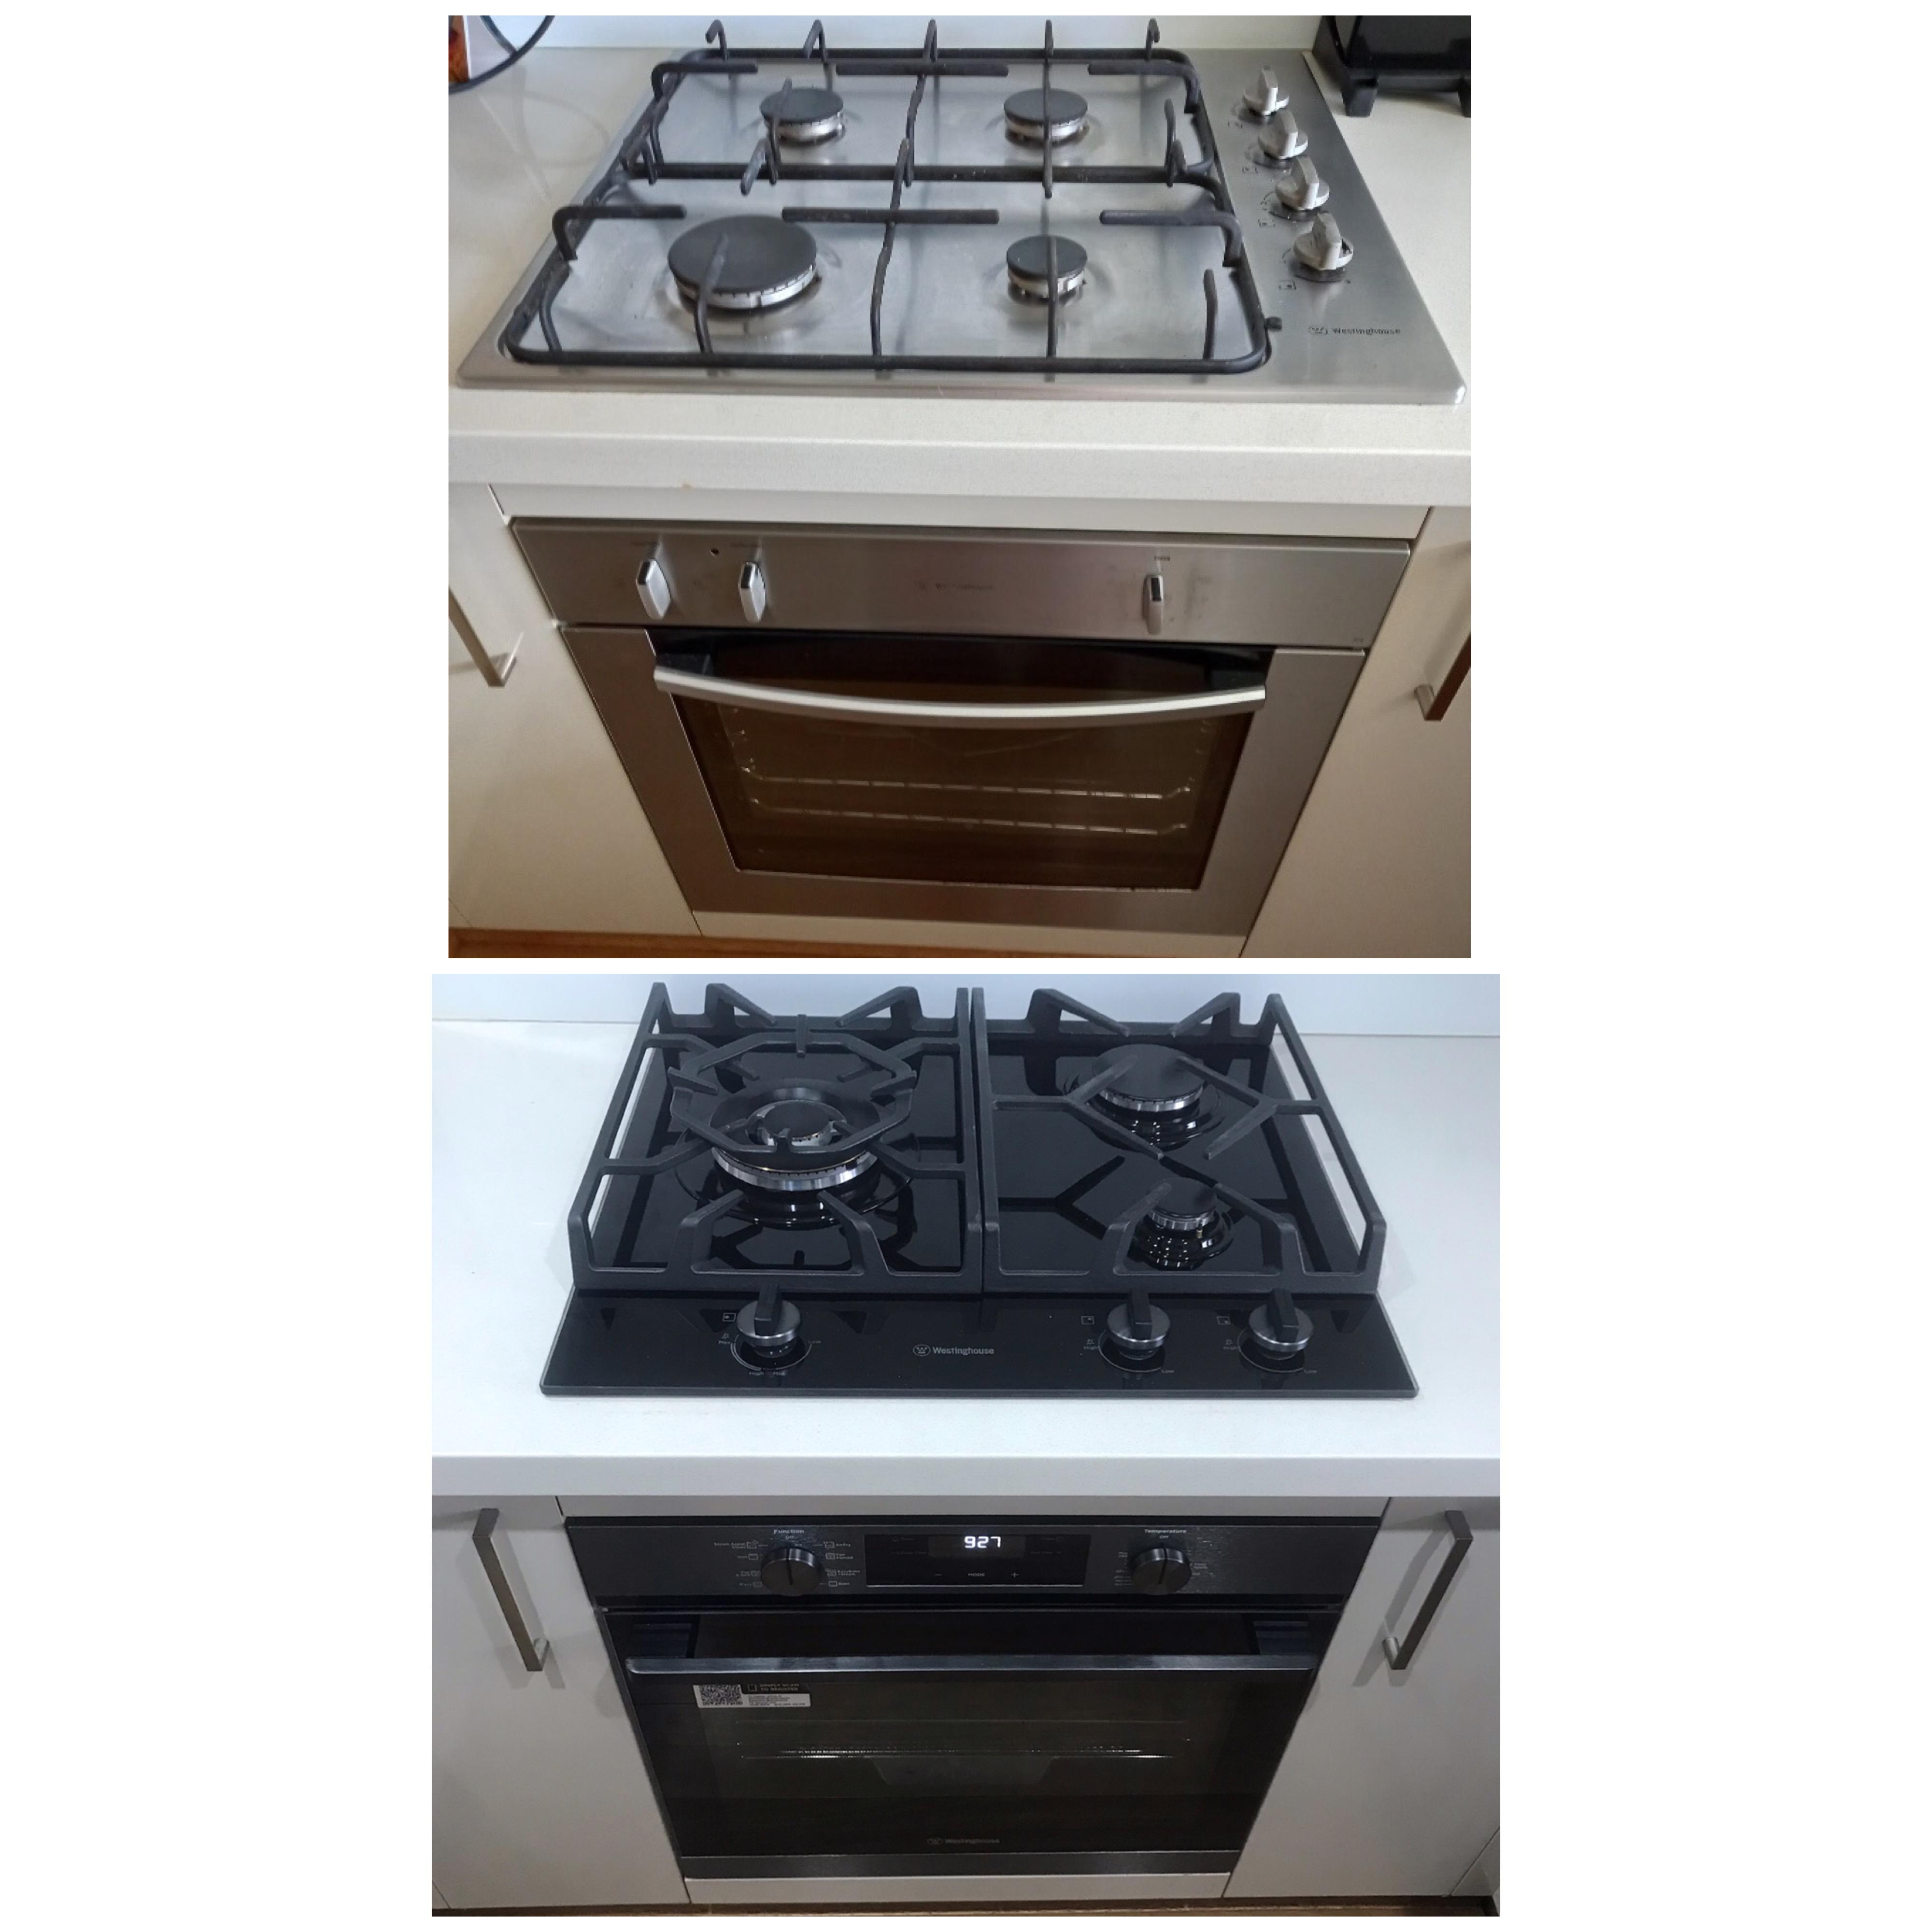 GAS COOKTOP & OVEN REPLACEMENTS CRUCIAL Plumbing Services Pty Ltd Seven Hills (02) 8041 4999